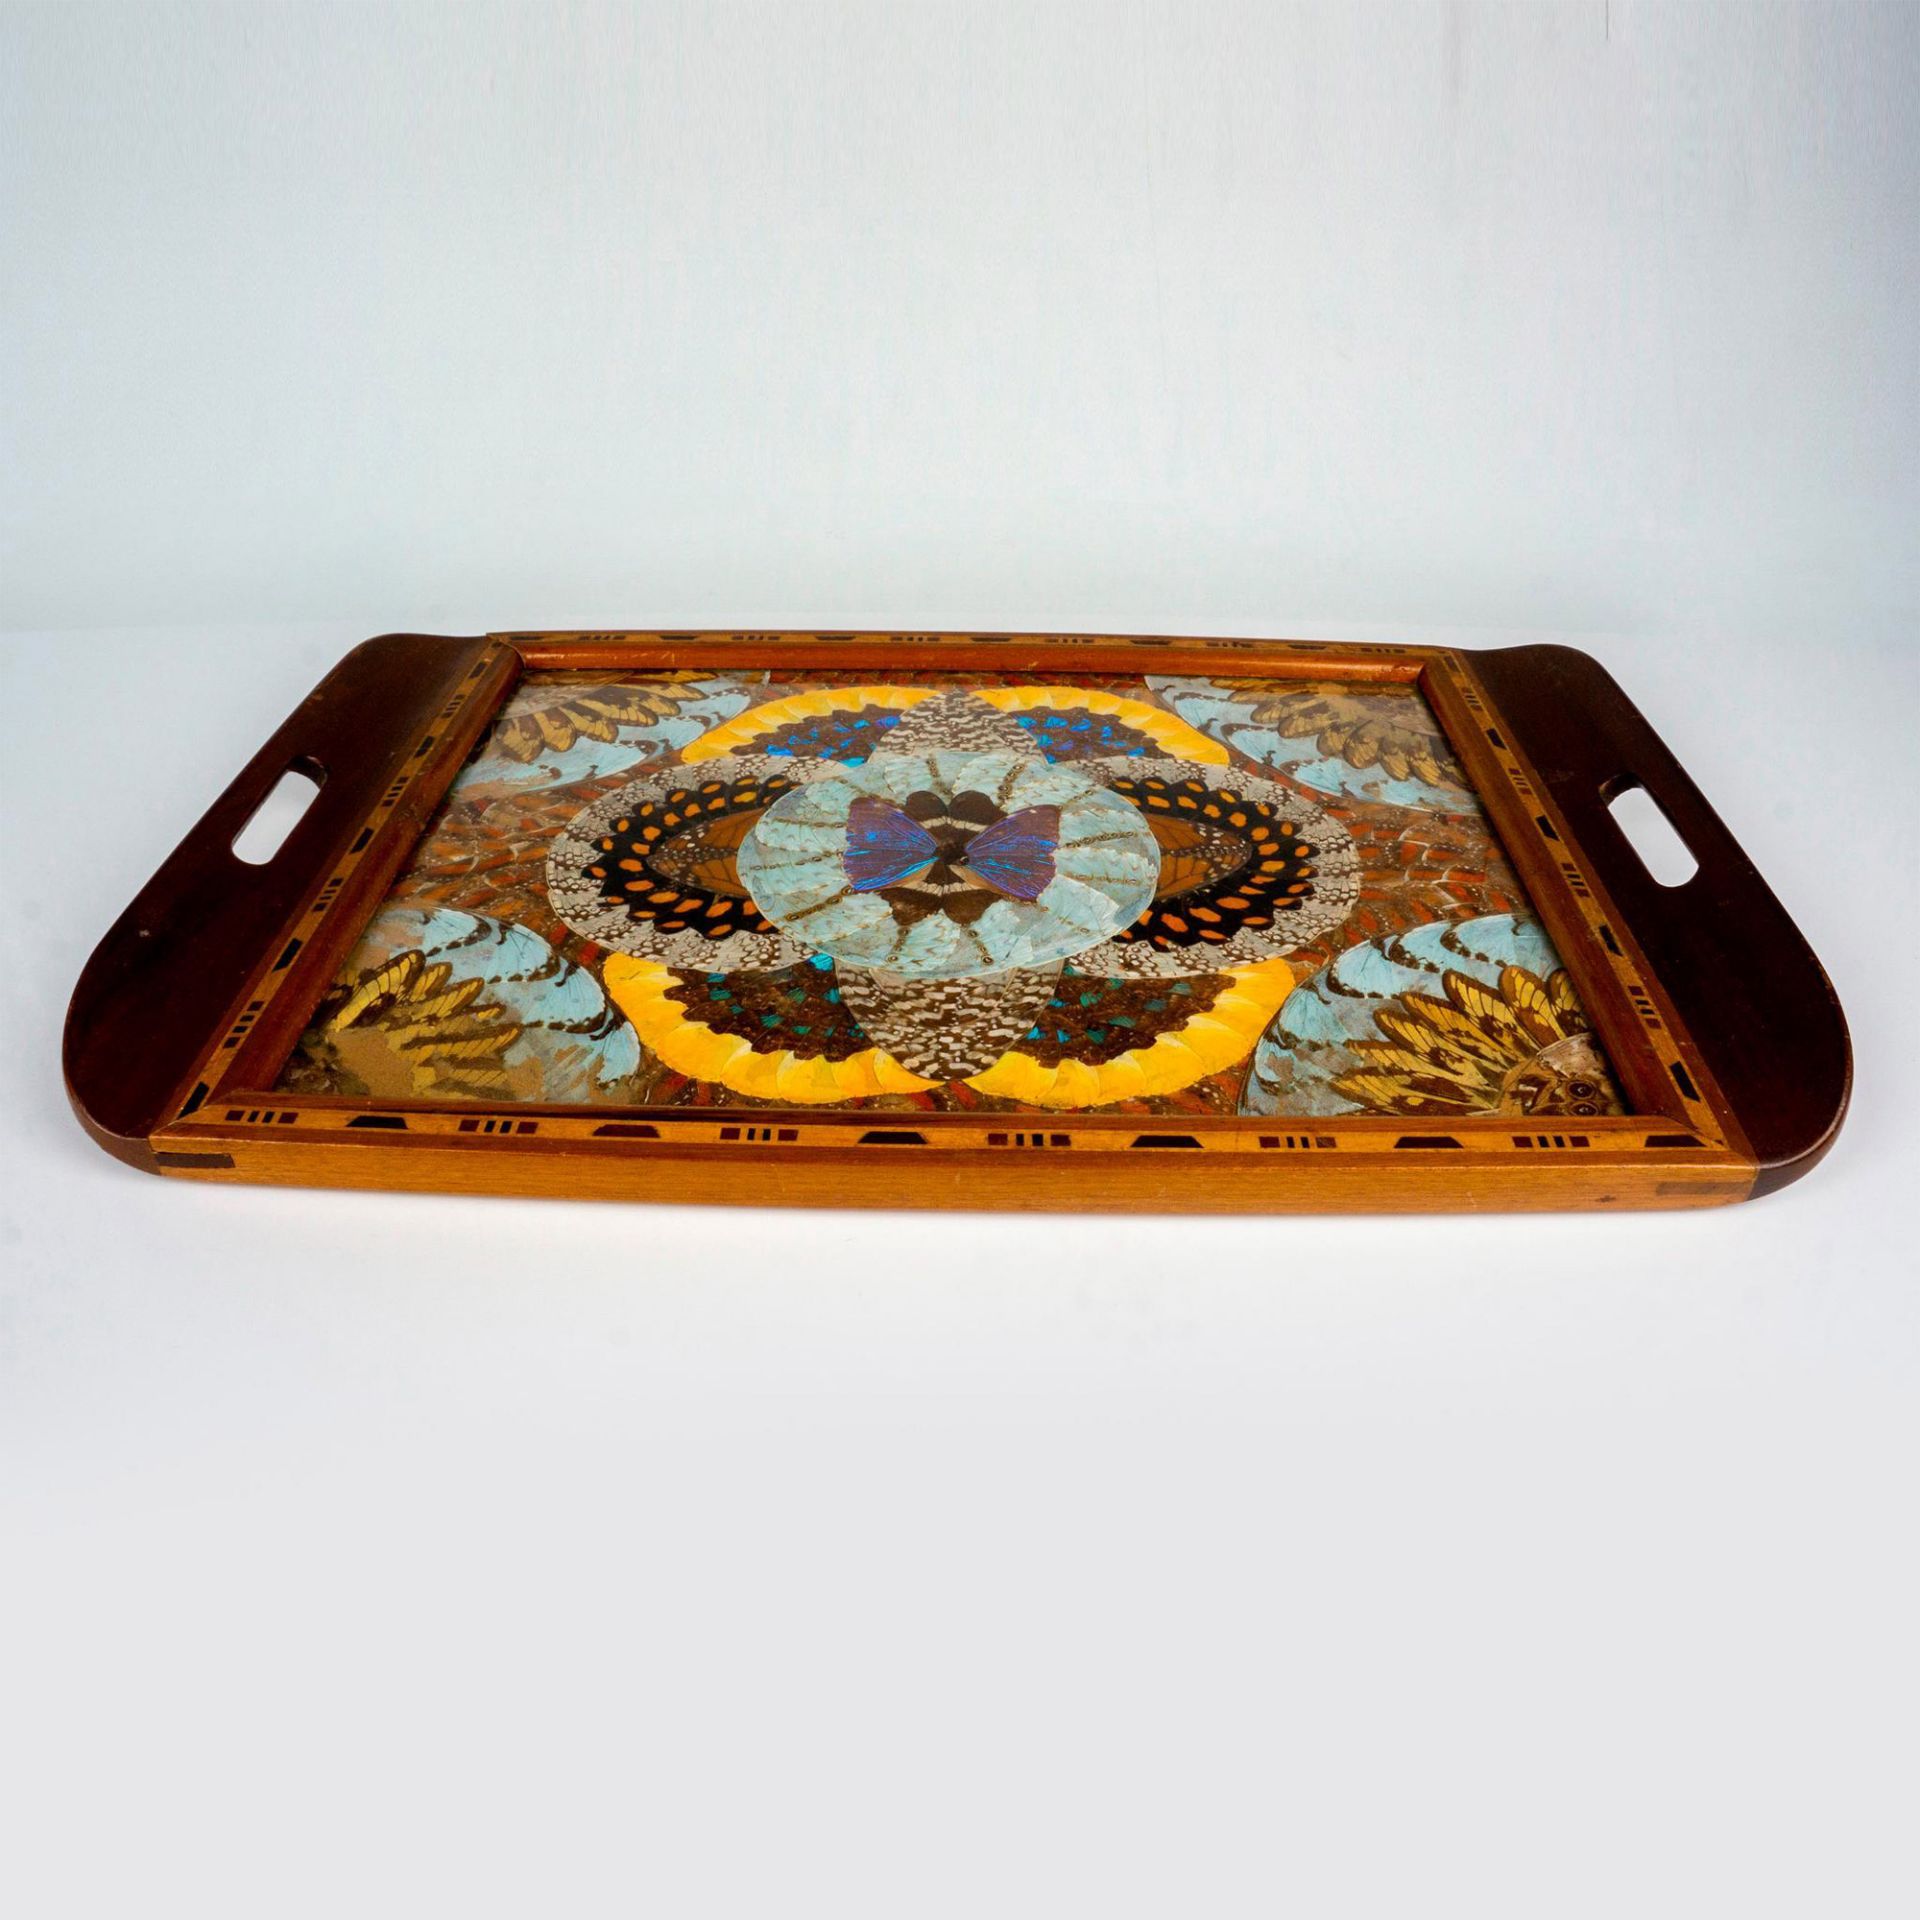 Brazilian Inlaid Tray Blue Morpho Butterfly Wings Design - Image 2 of 3